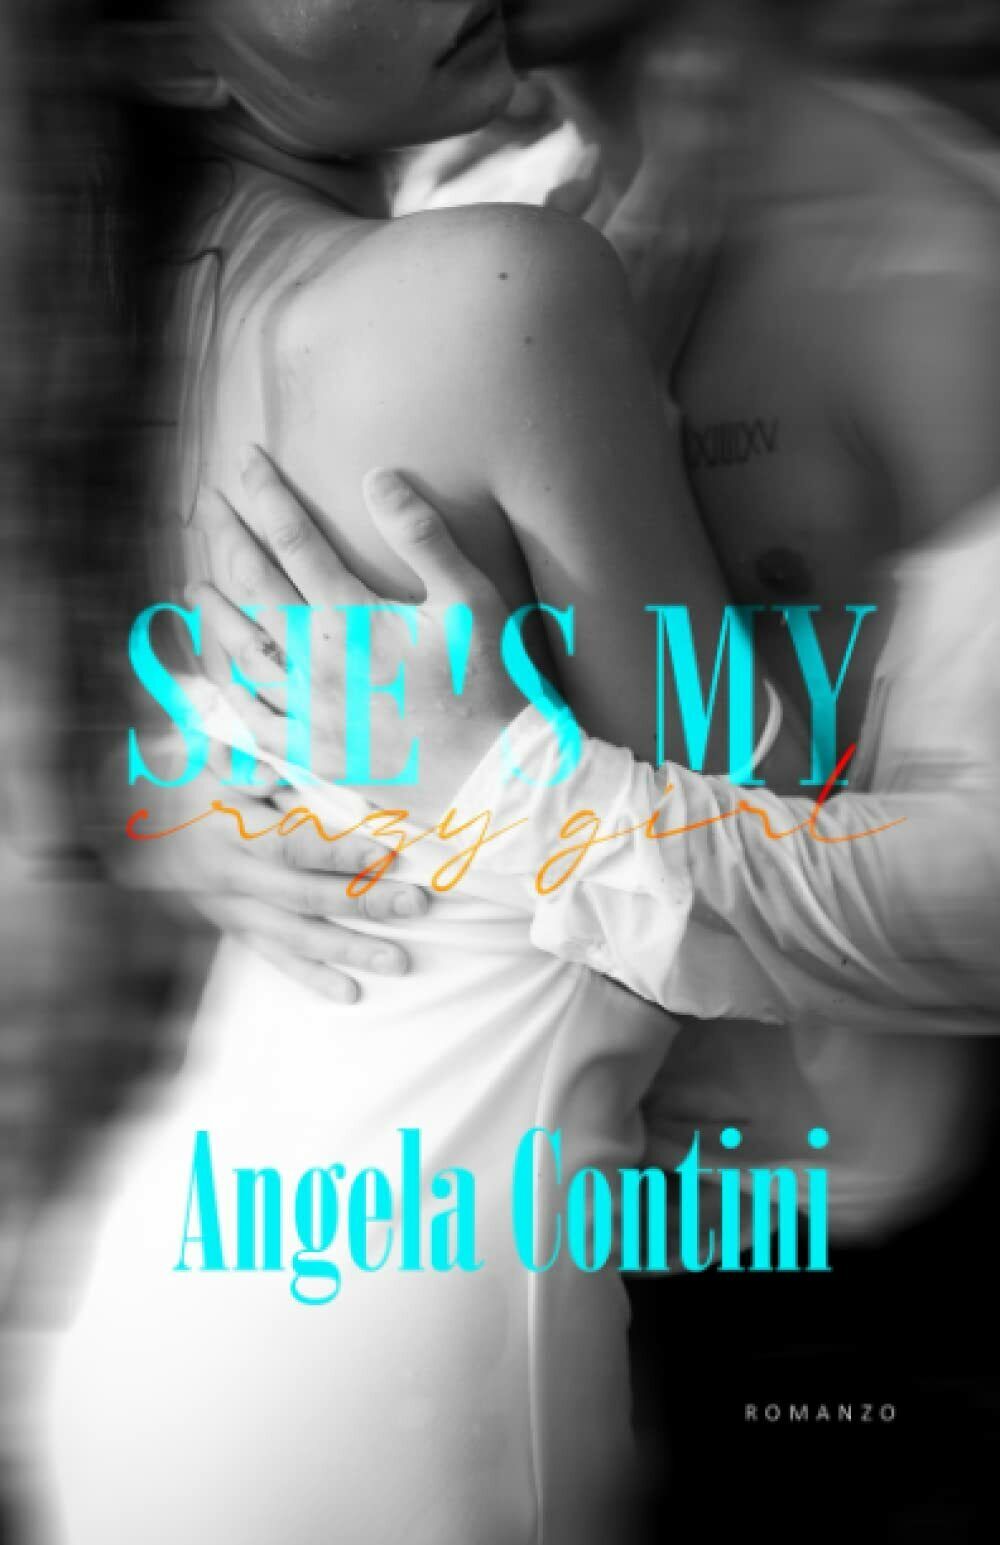 She?s my crazy girl di Angela Contini,  2022,  Indipendently Published